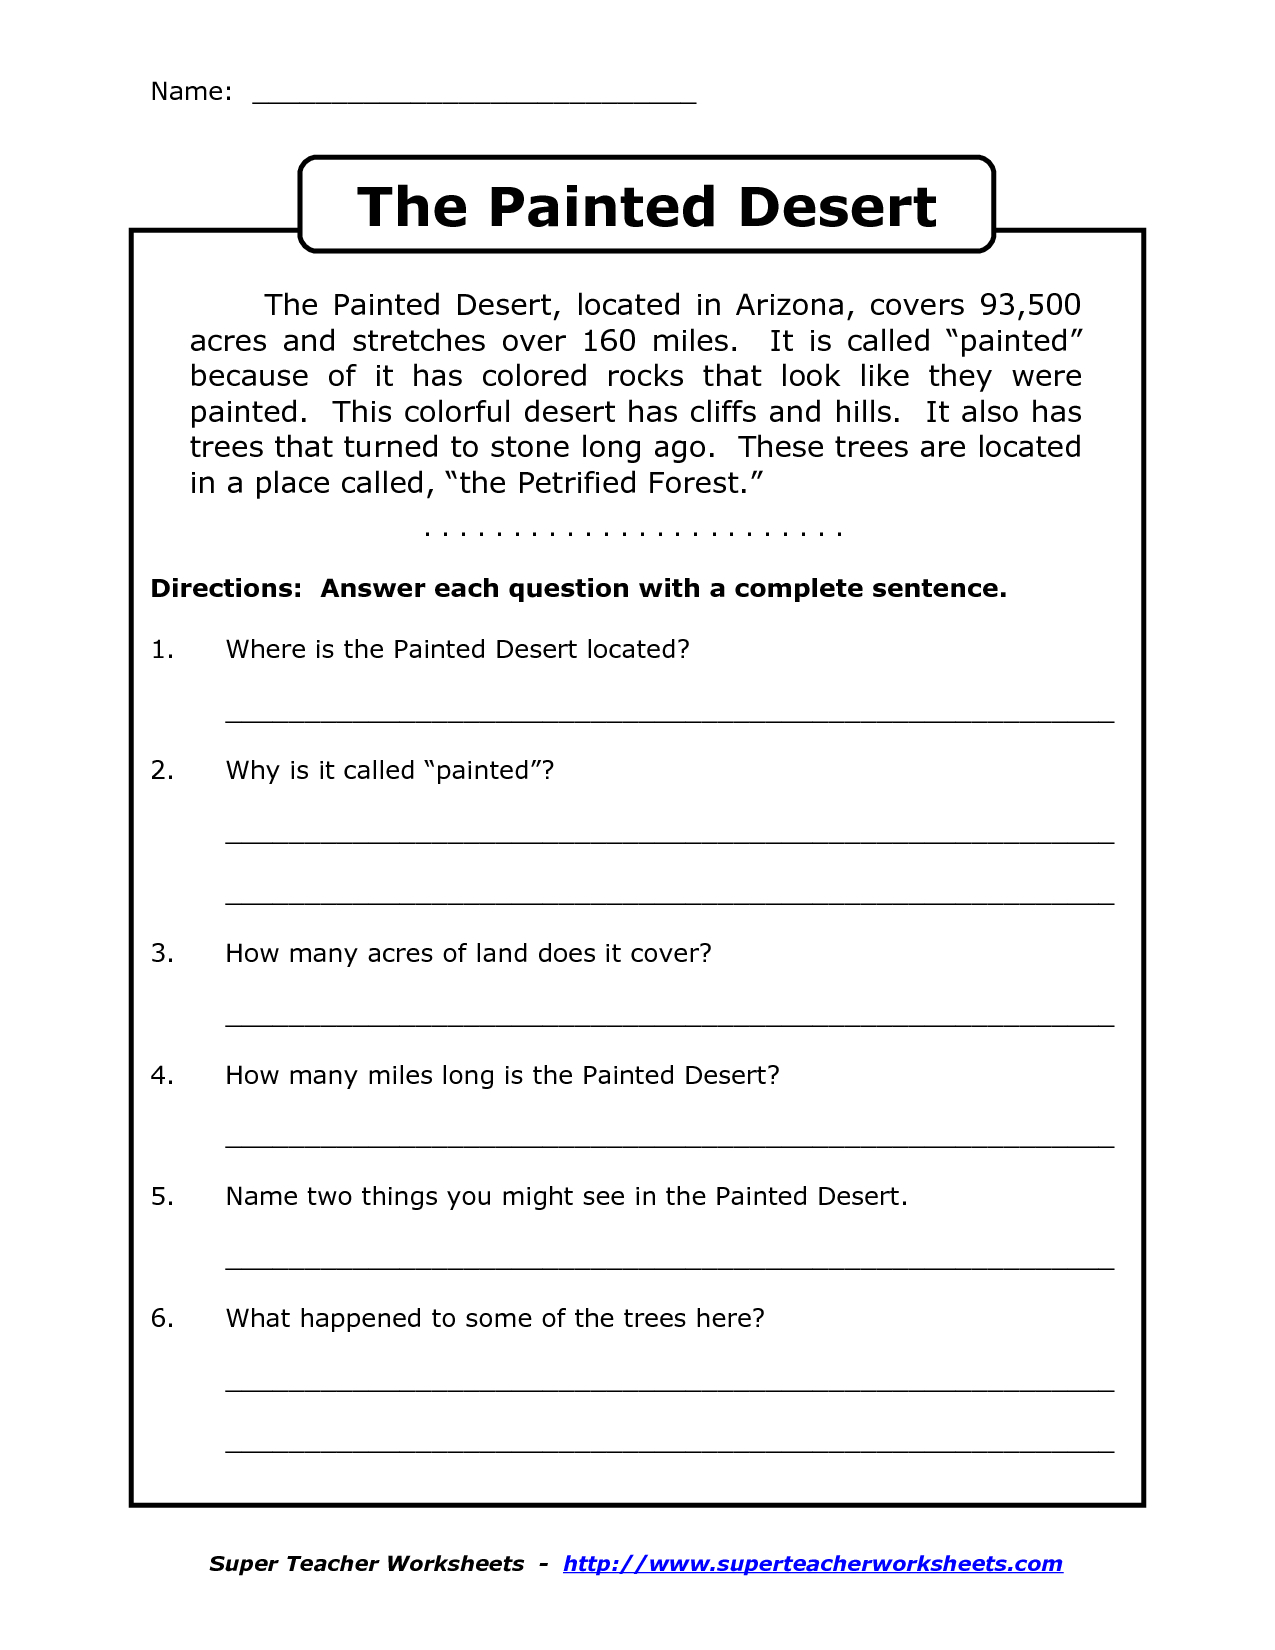 Reading Worksheets For 4Th Grade | Reading Comprehension Worksheets | 4Th Grade Comprehension Worksheets Printable